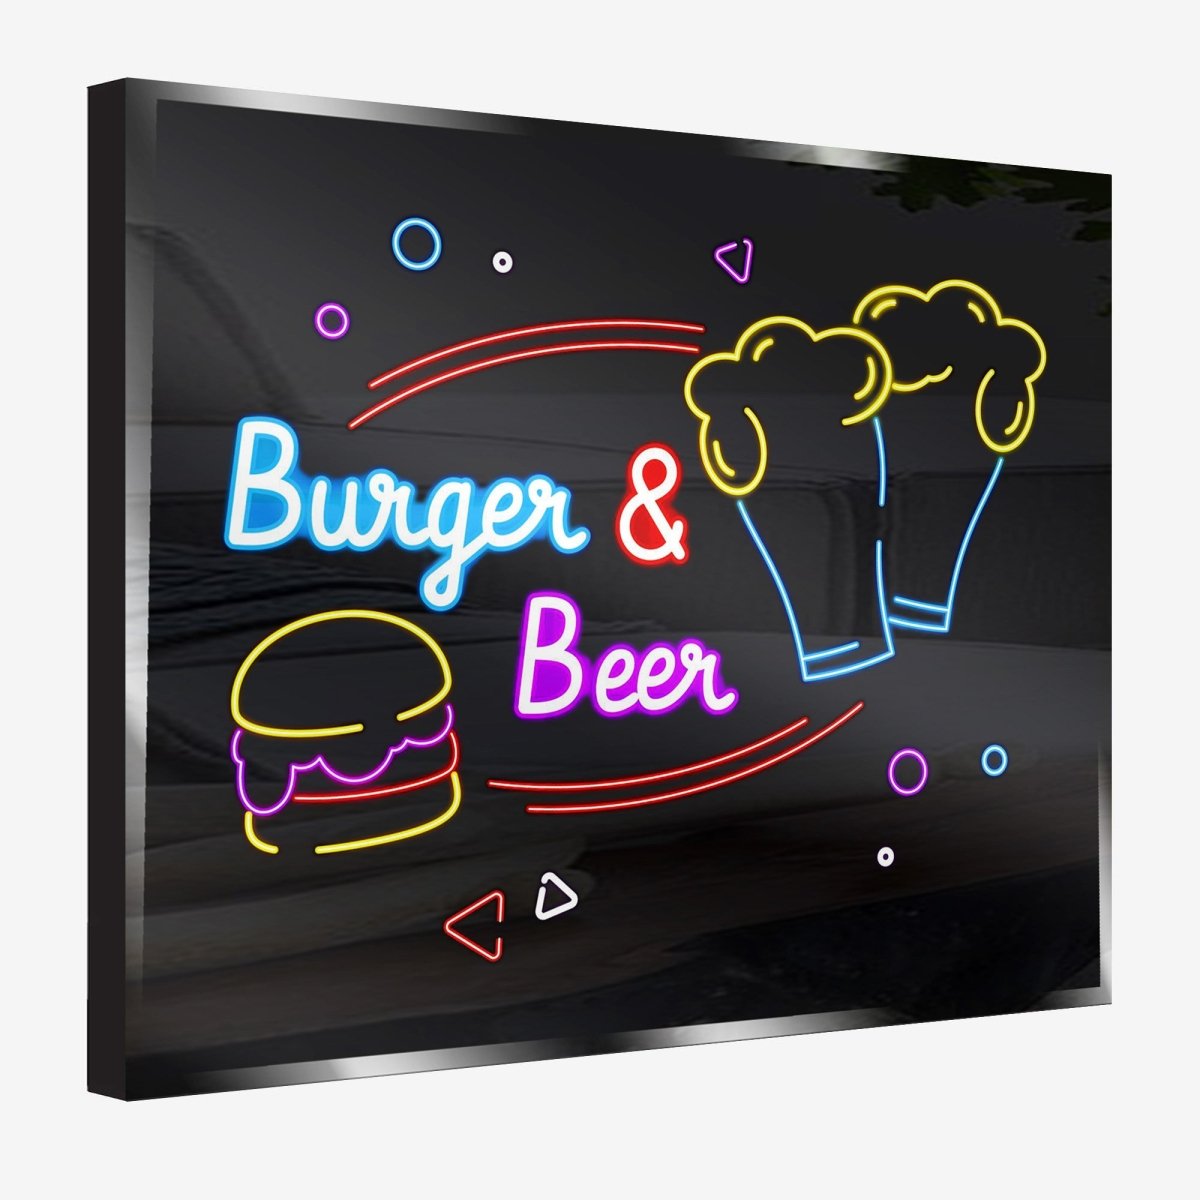 Personalized Neon Sign Burger & Beer - madaboutneon